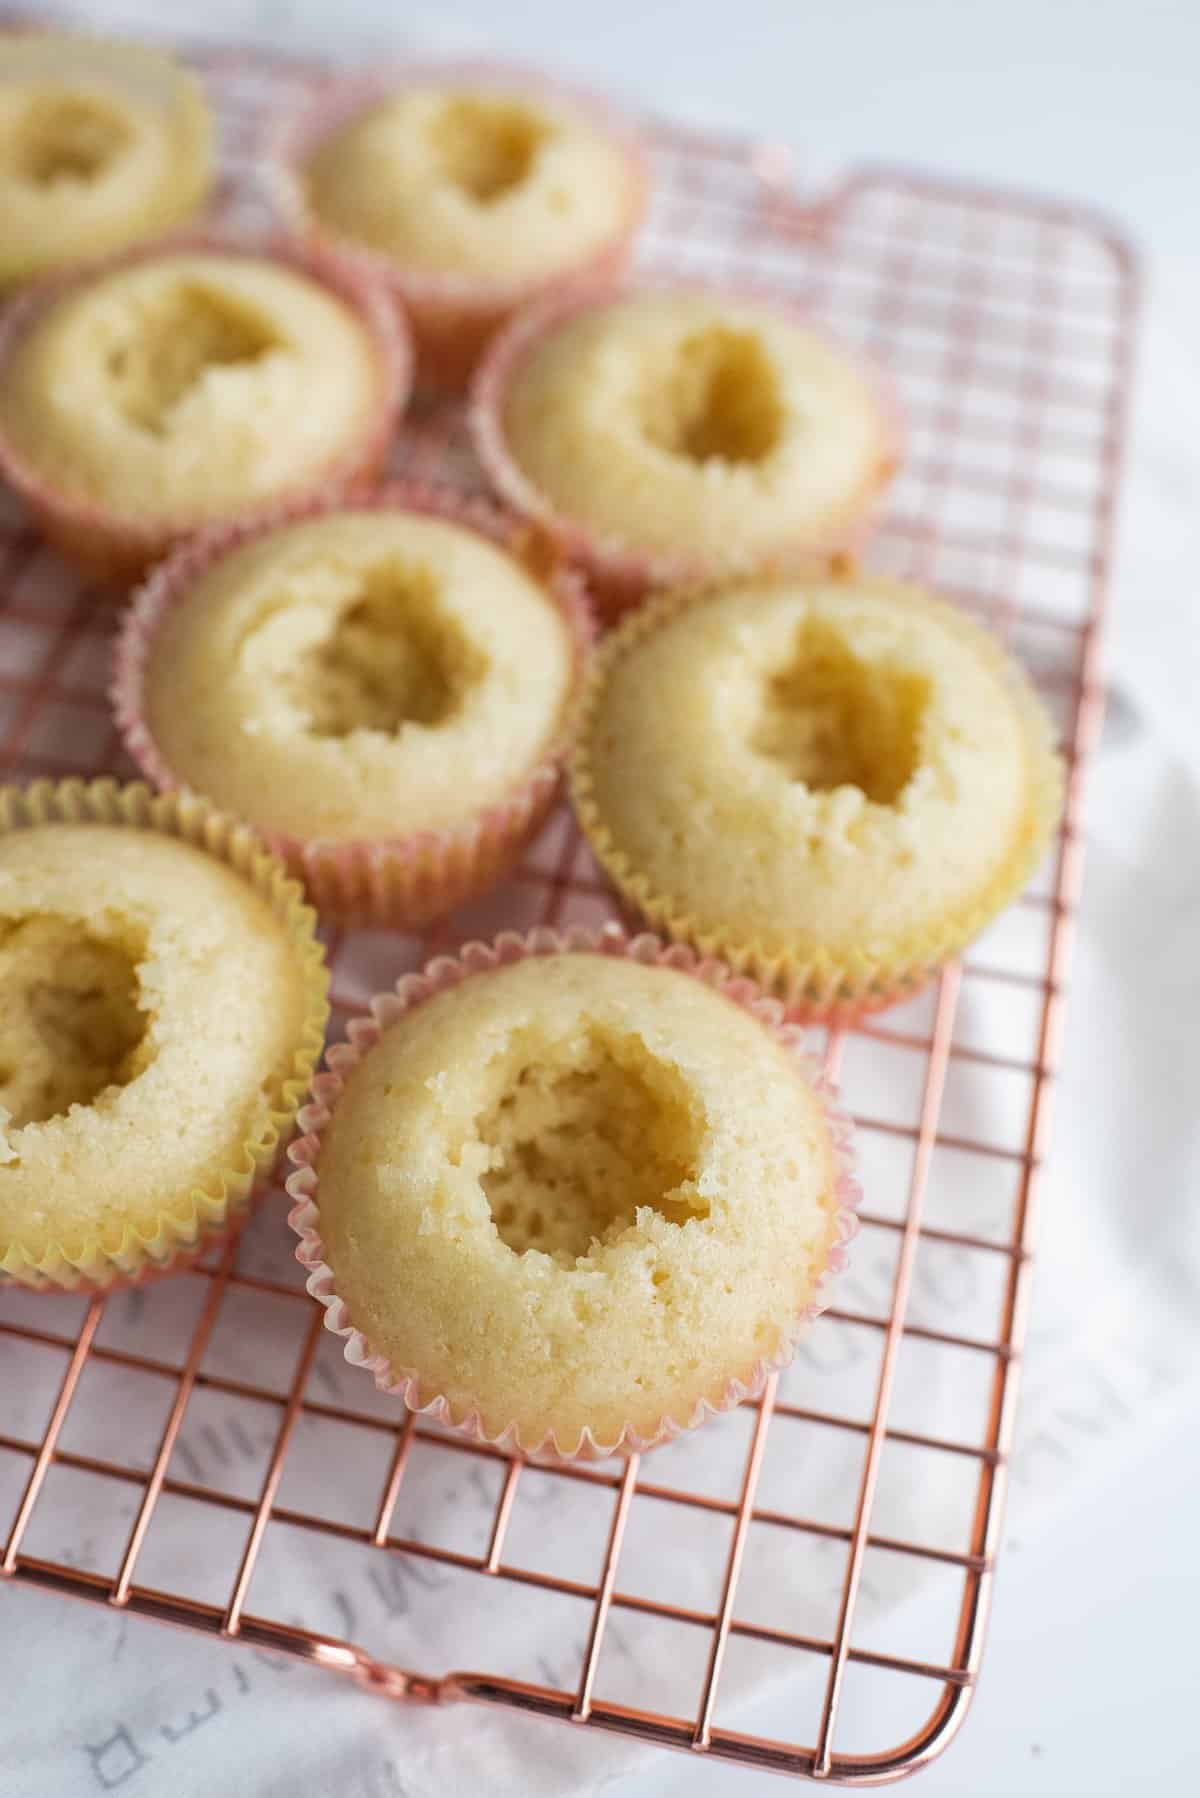 scoop out a hole in the middle of each cupcake